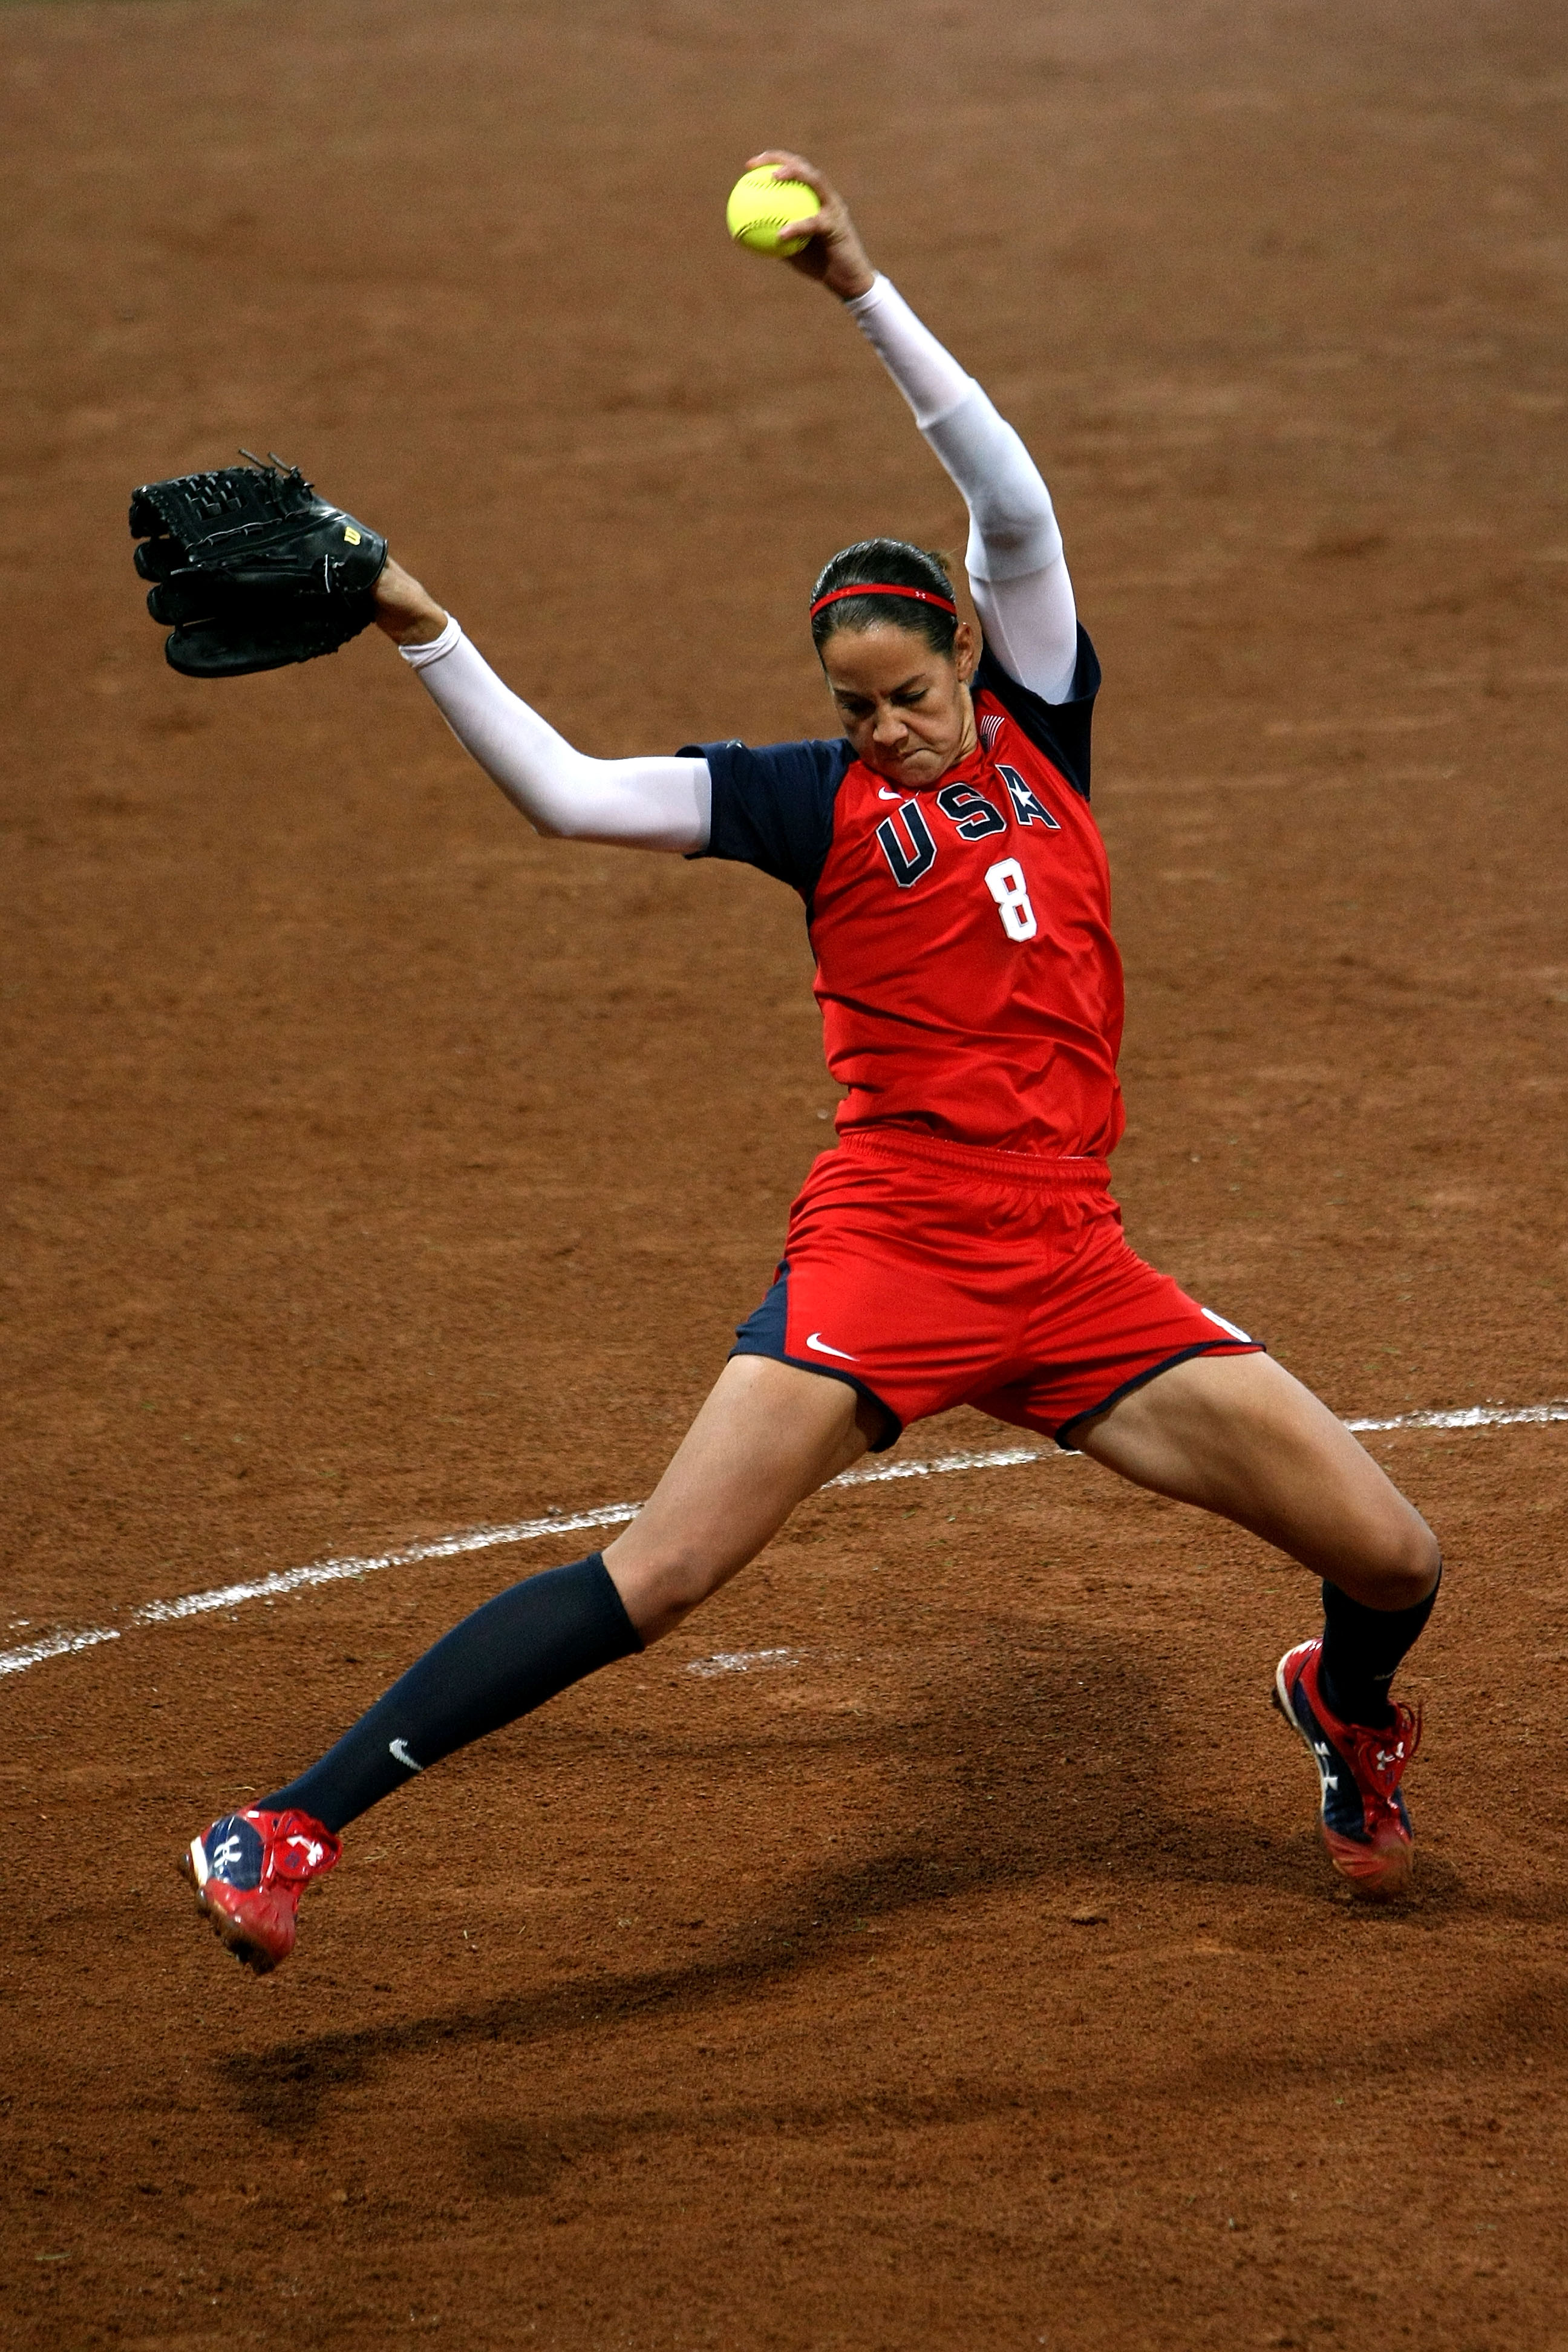 Is Softball An Olympic Sport In 2016? The Games Have Long ...